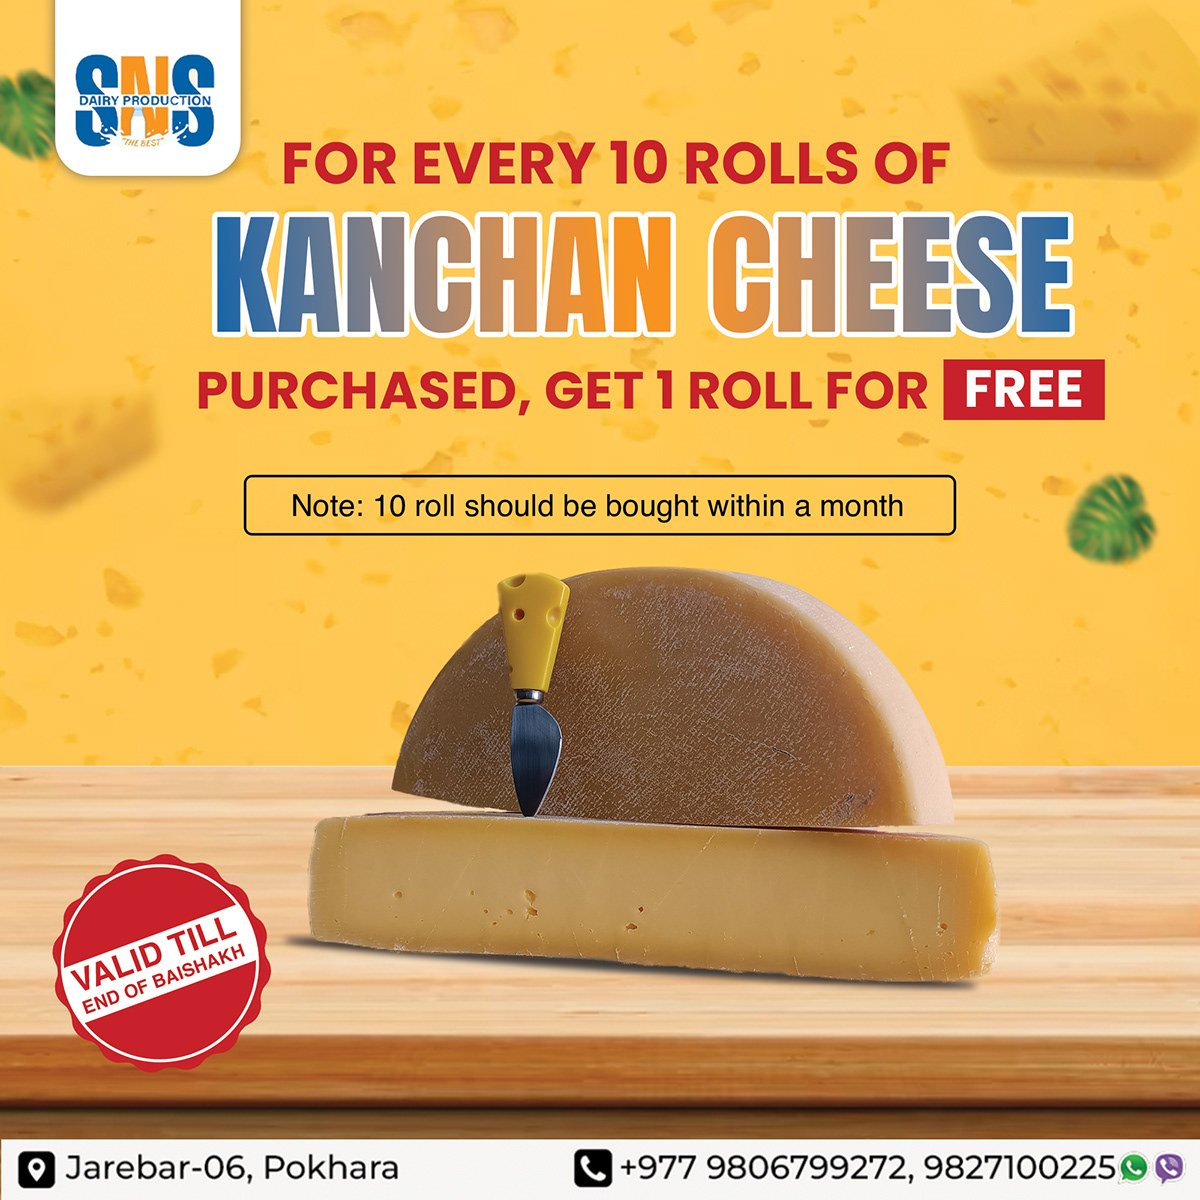 Cheese kanchan Dairy Dairy Product Packaging Advertising  Social media post dairy farm